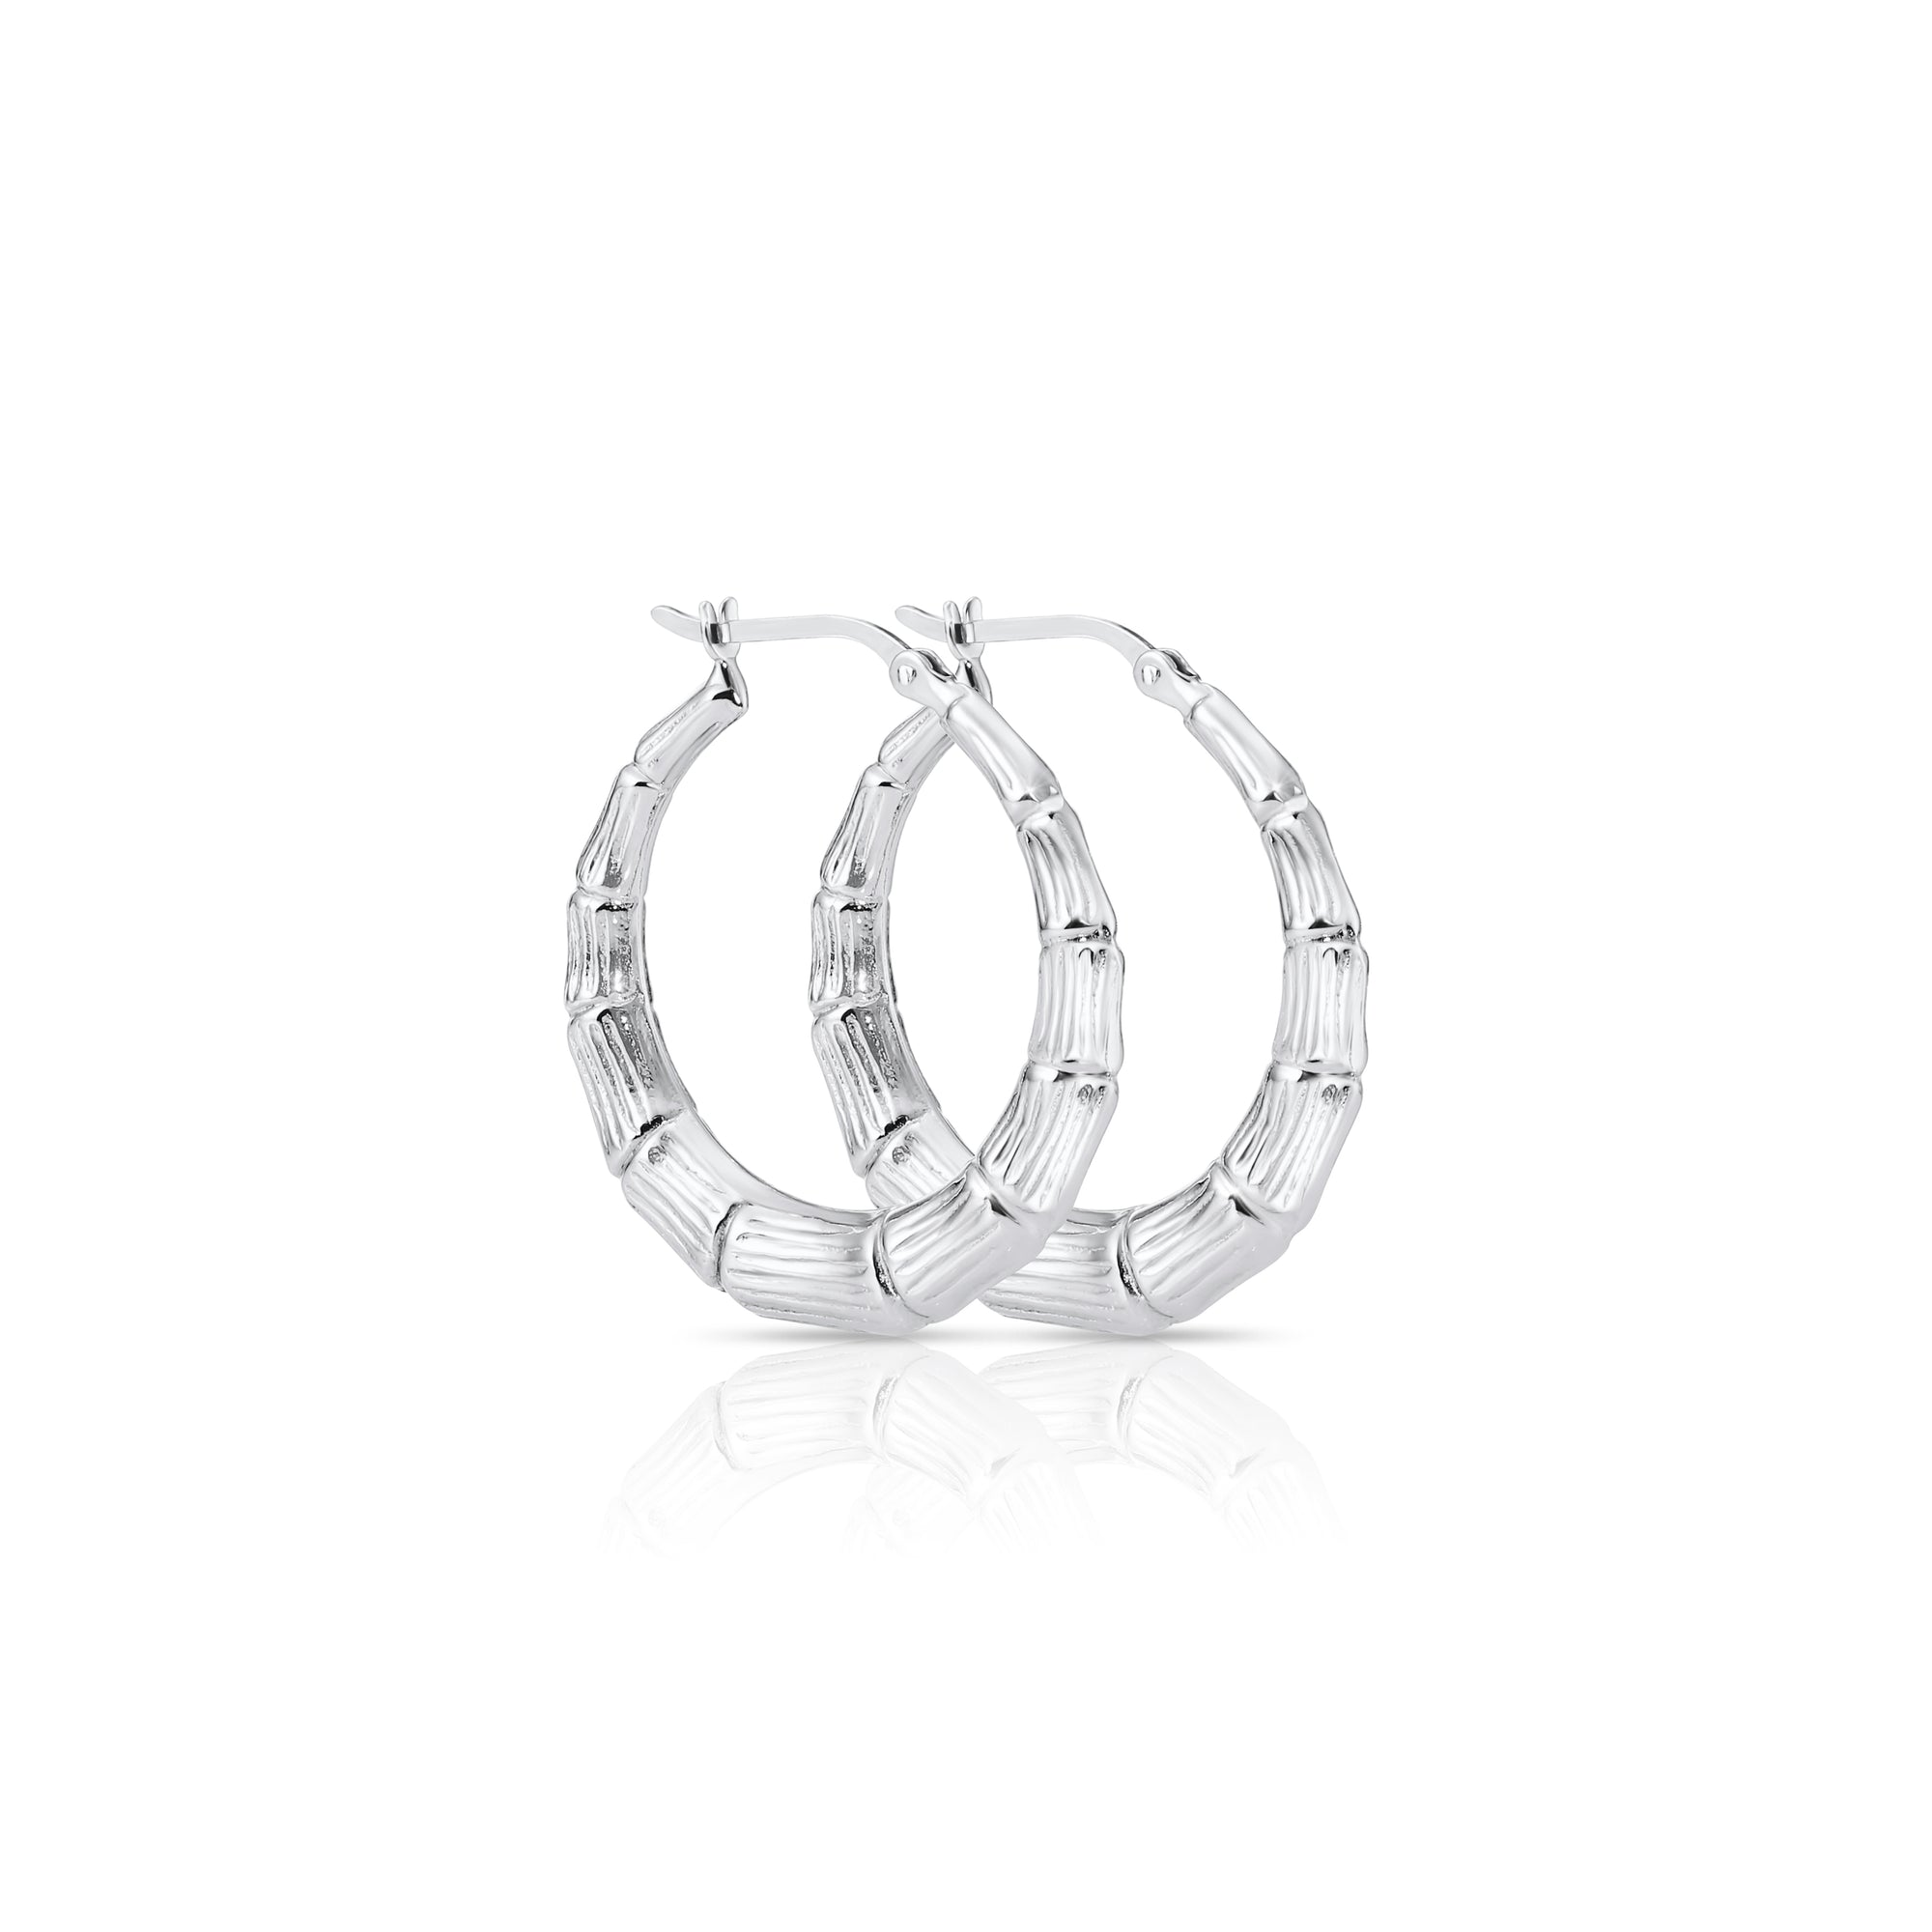 Bamboo Texture Round Hoop Earrings in Sterling Silver